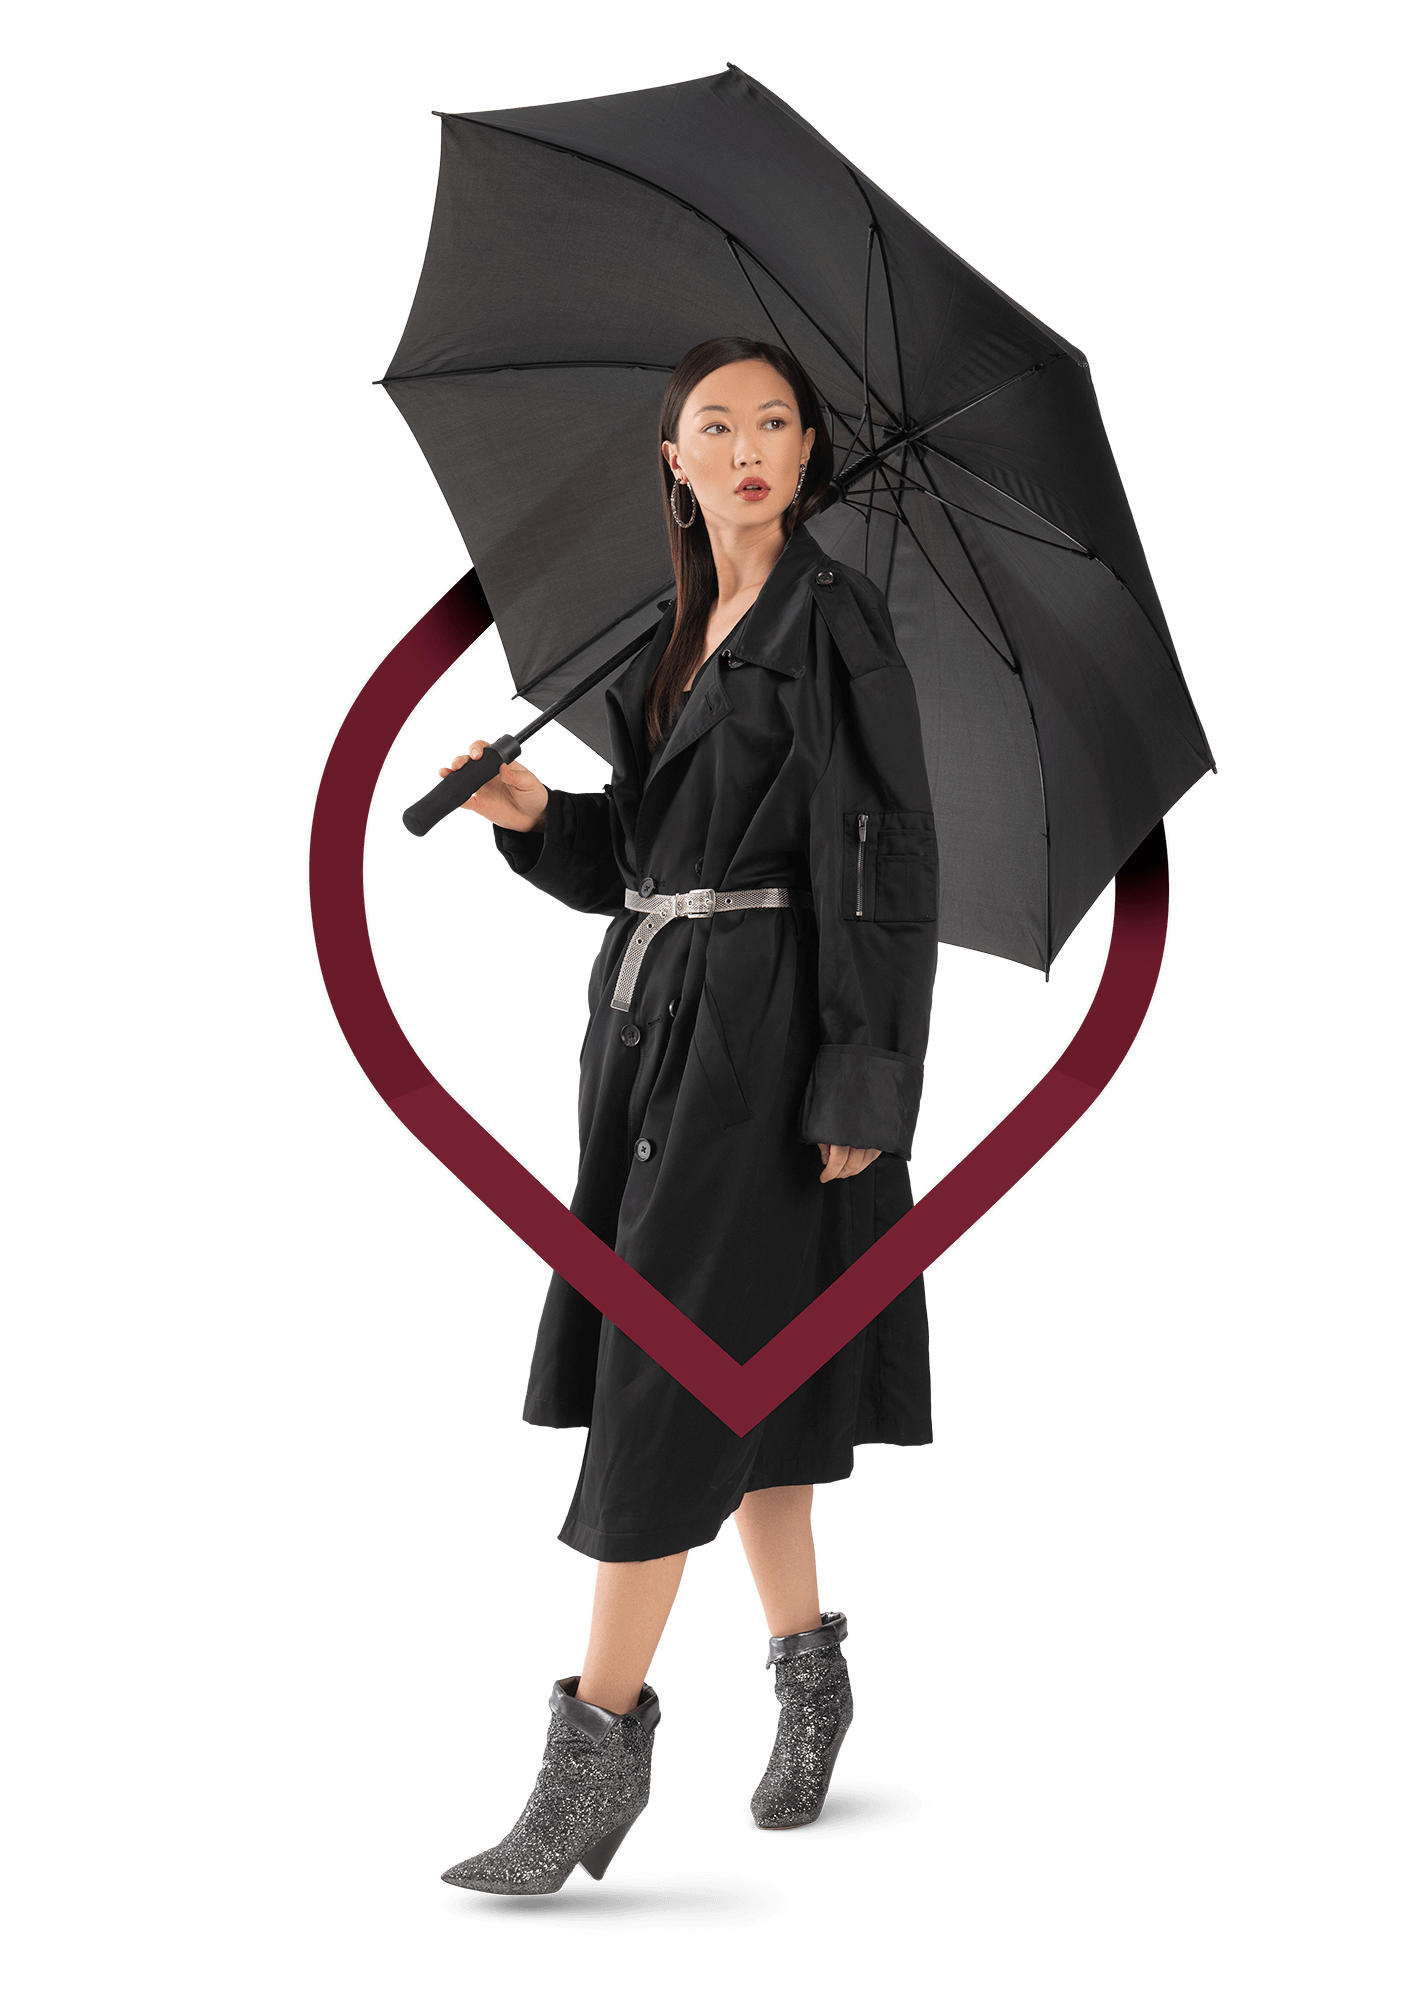 Full product discovery suite = woman with umbrella - desktop